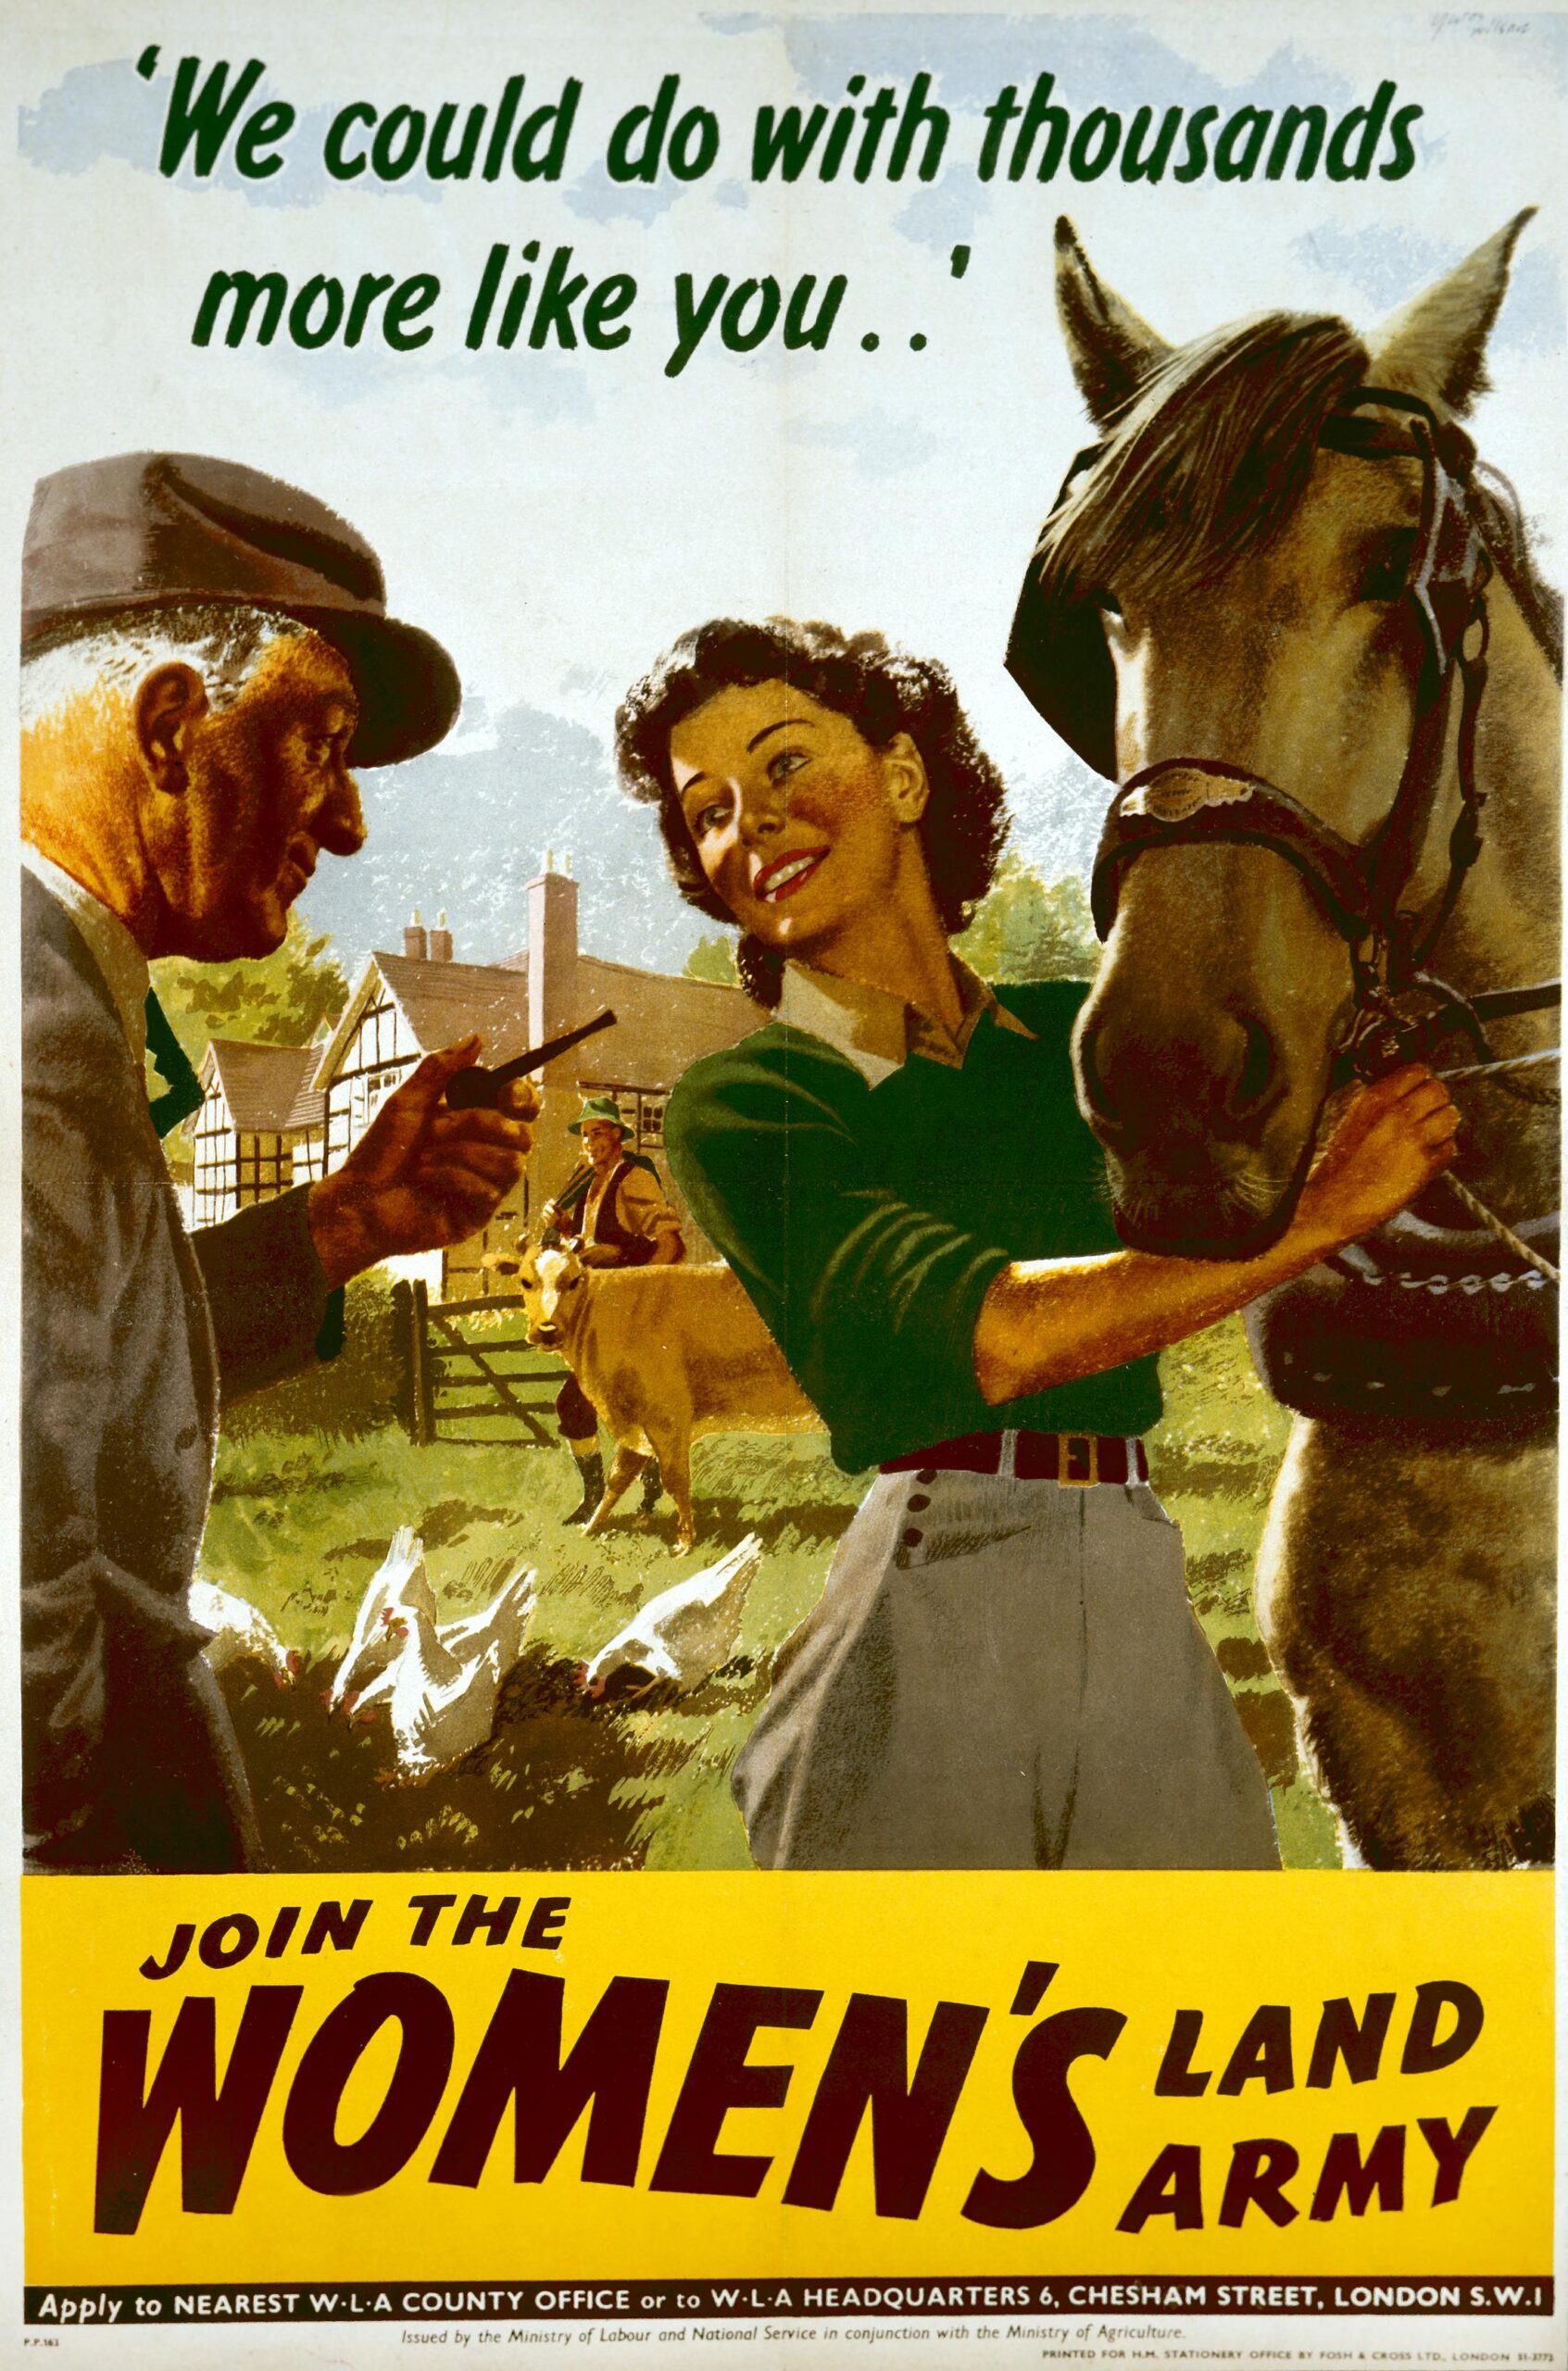 Poster with an illustration of an older man speaking to a young woman who is holding the reins of a horse standing next to her. A farm landscape is in the background.